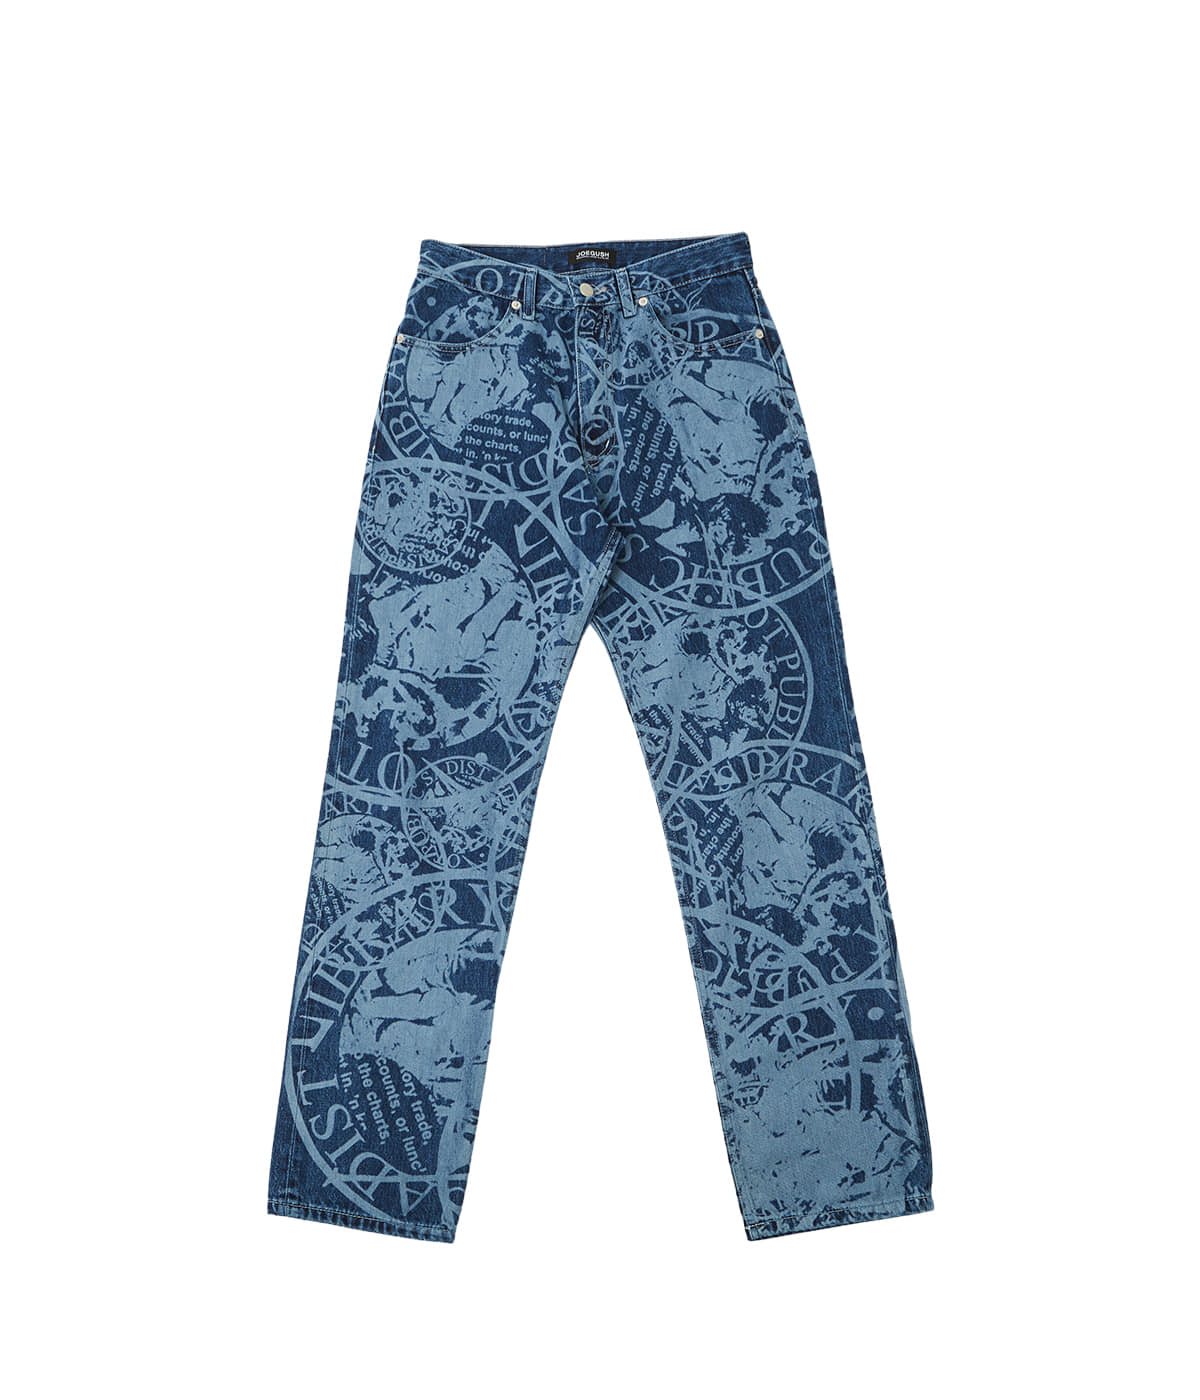 Laser Library Jeans (Deep blue)